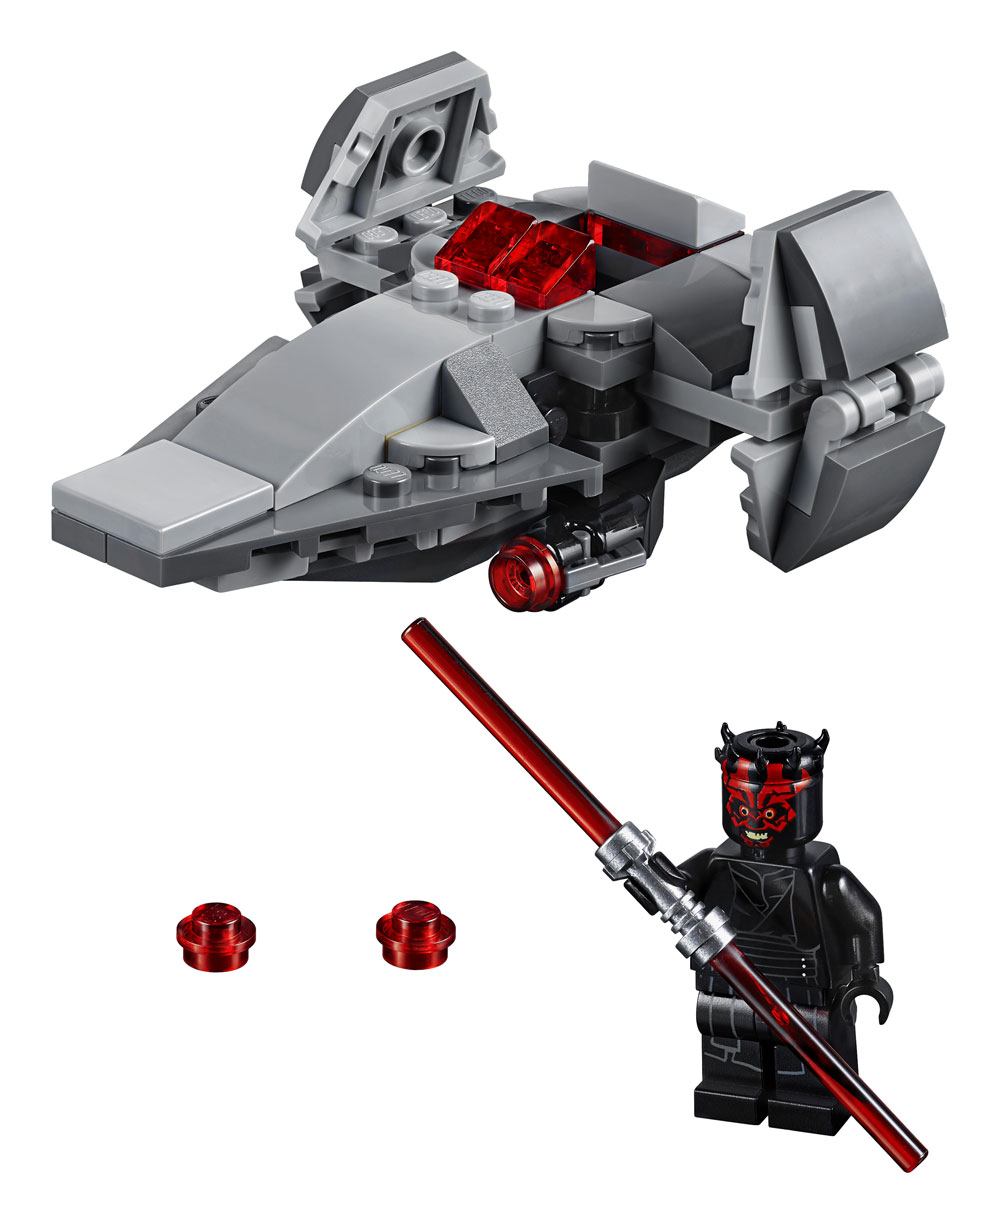 LEGO Star Wars? Microfighters Series 6 - Sith Infiltrator?